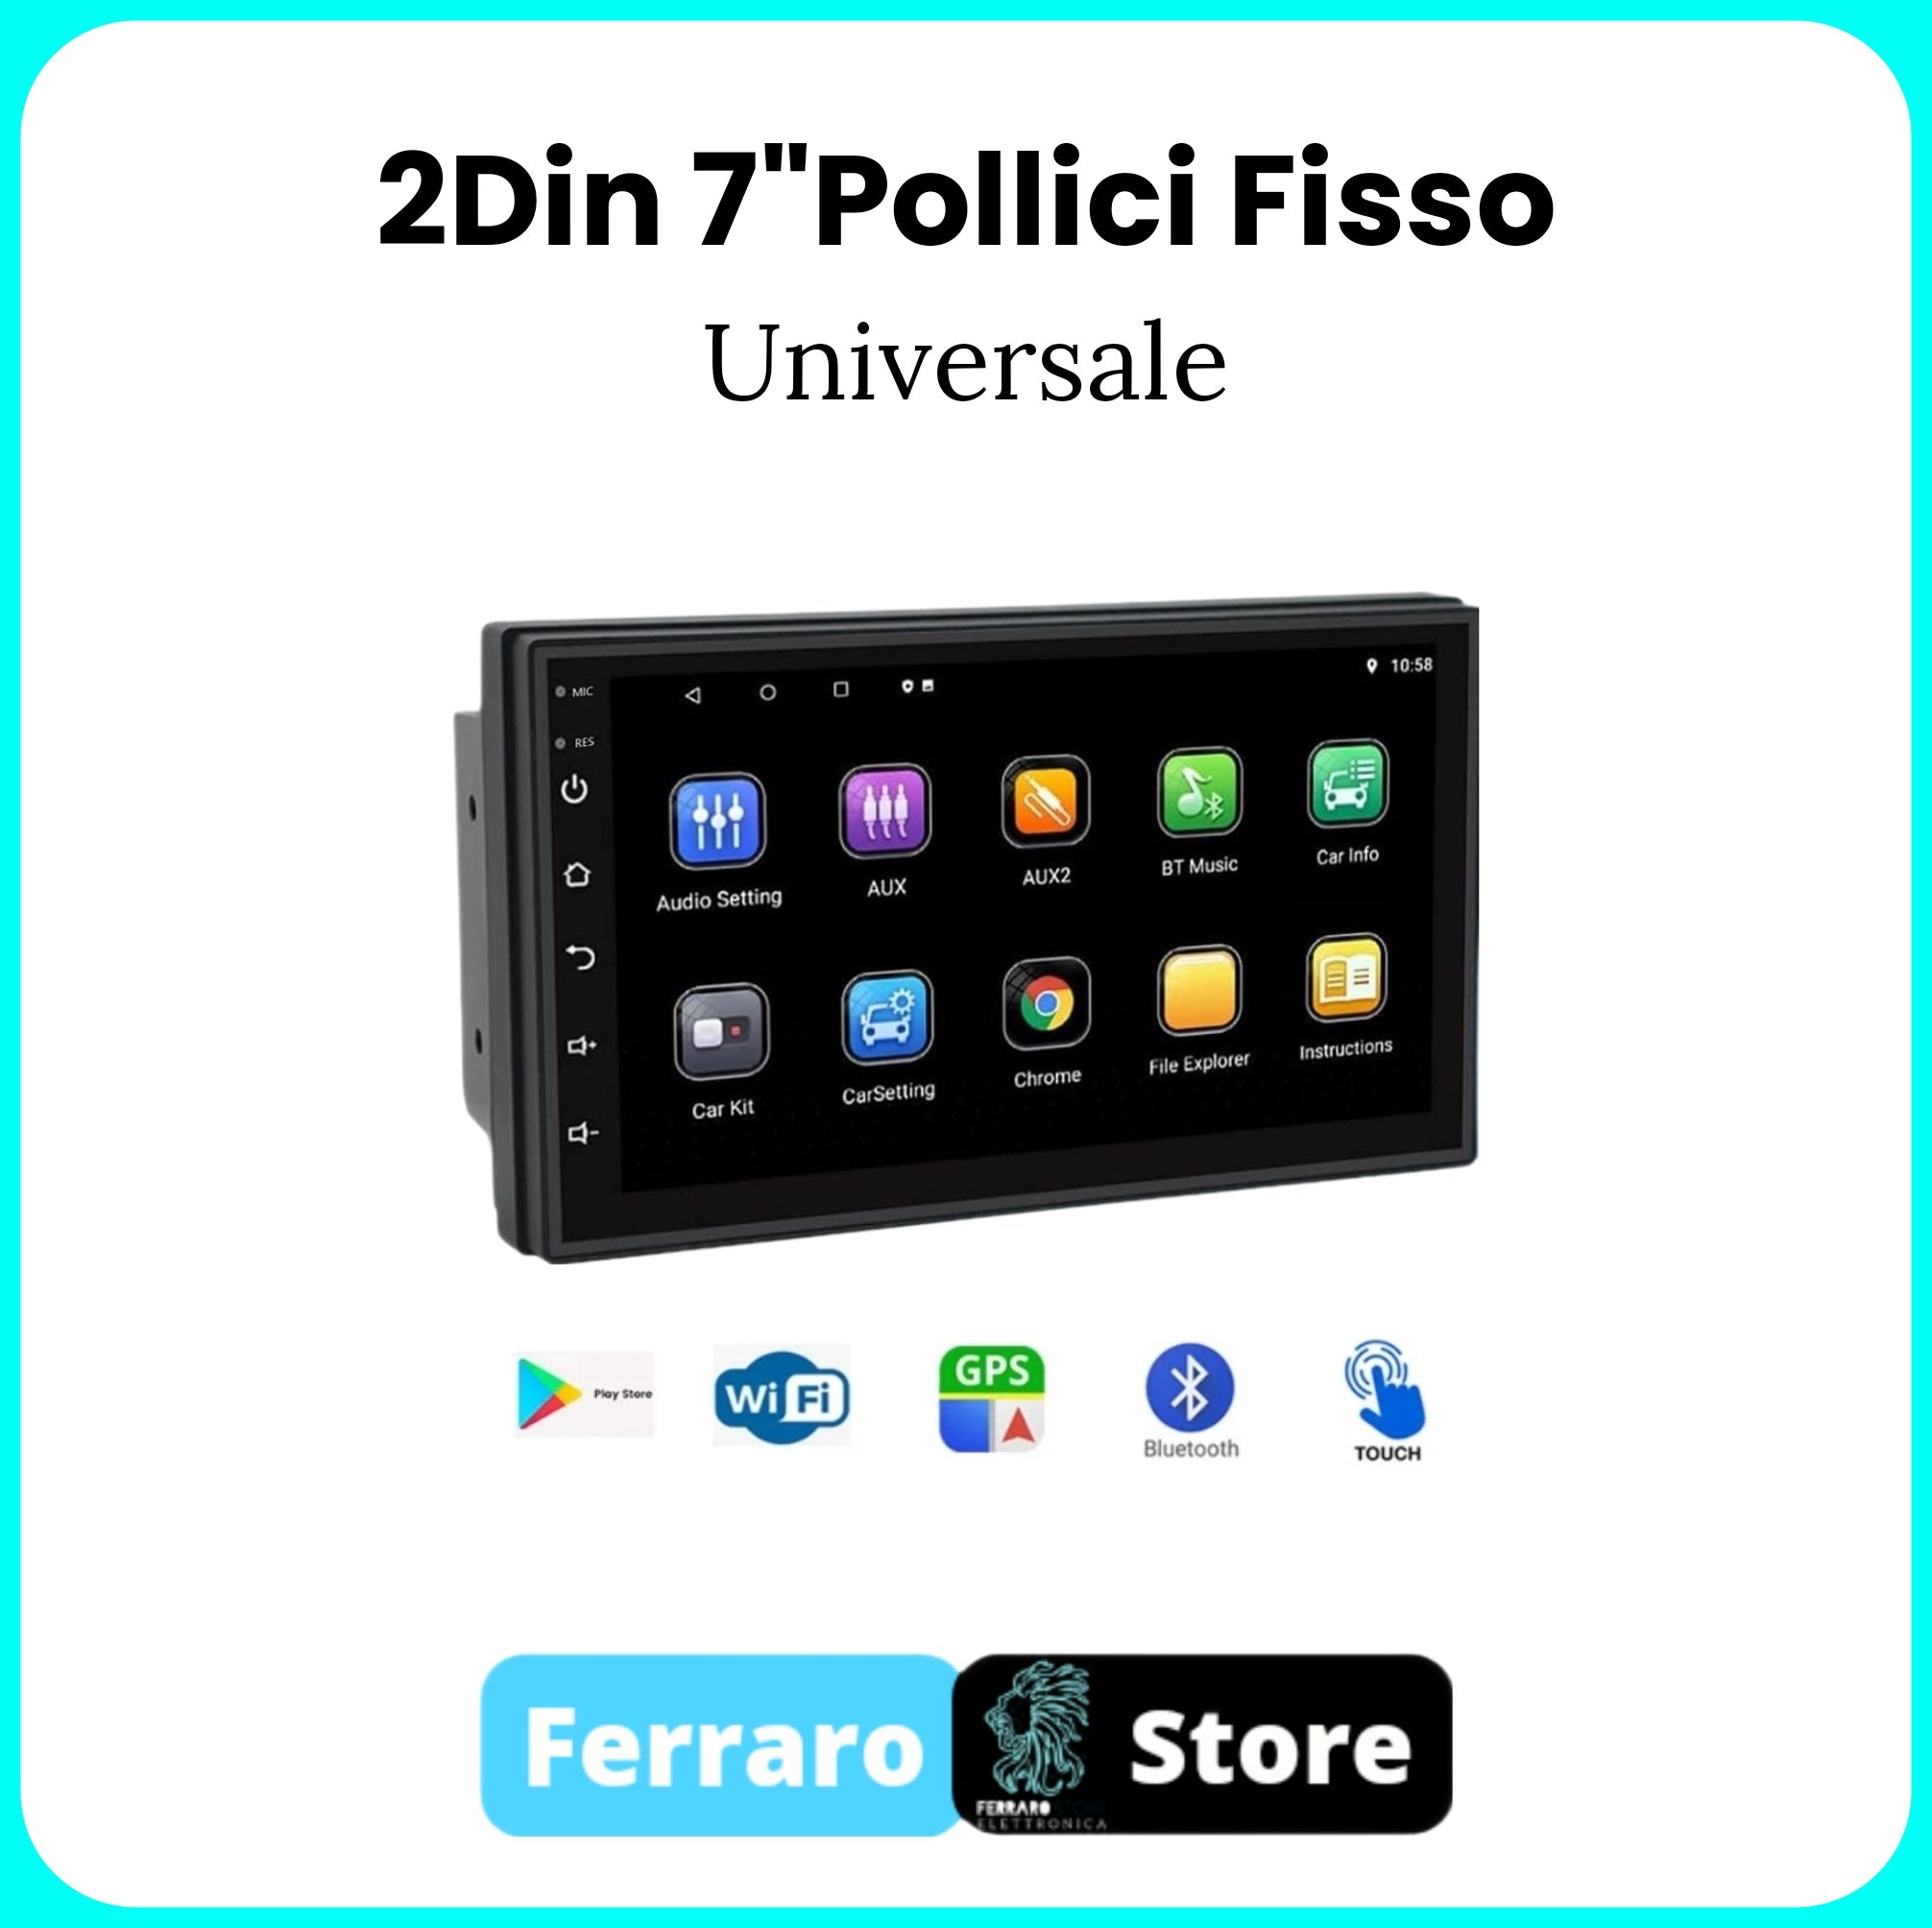 Autoradio Universale [FISSO]- 2Din 7"pollici, Full Touch, Bluetooth, Radio, Android, Youtube, Navigatore, PlayStore